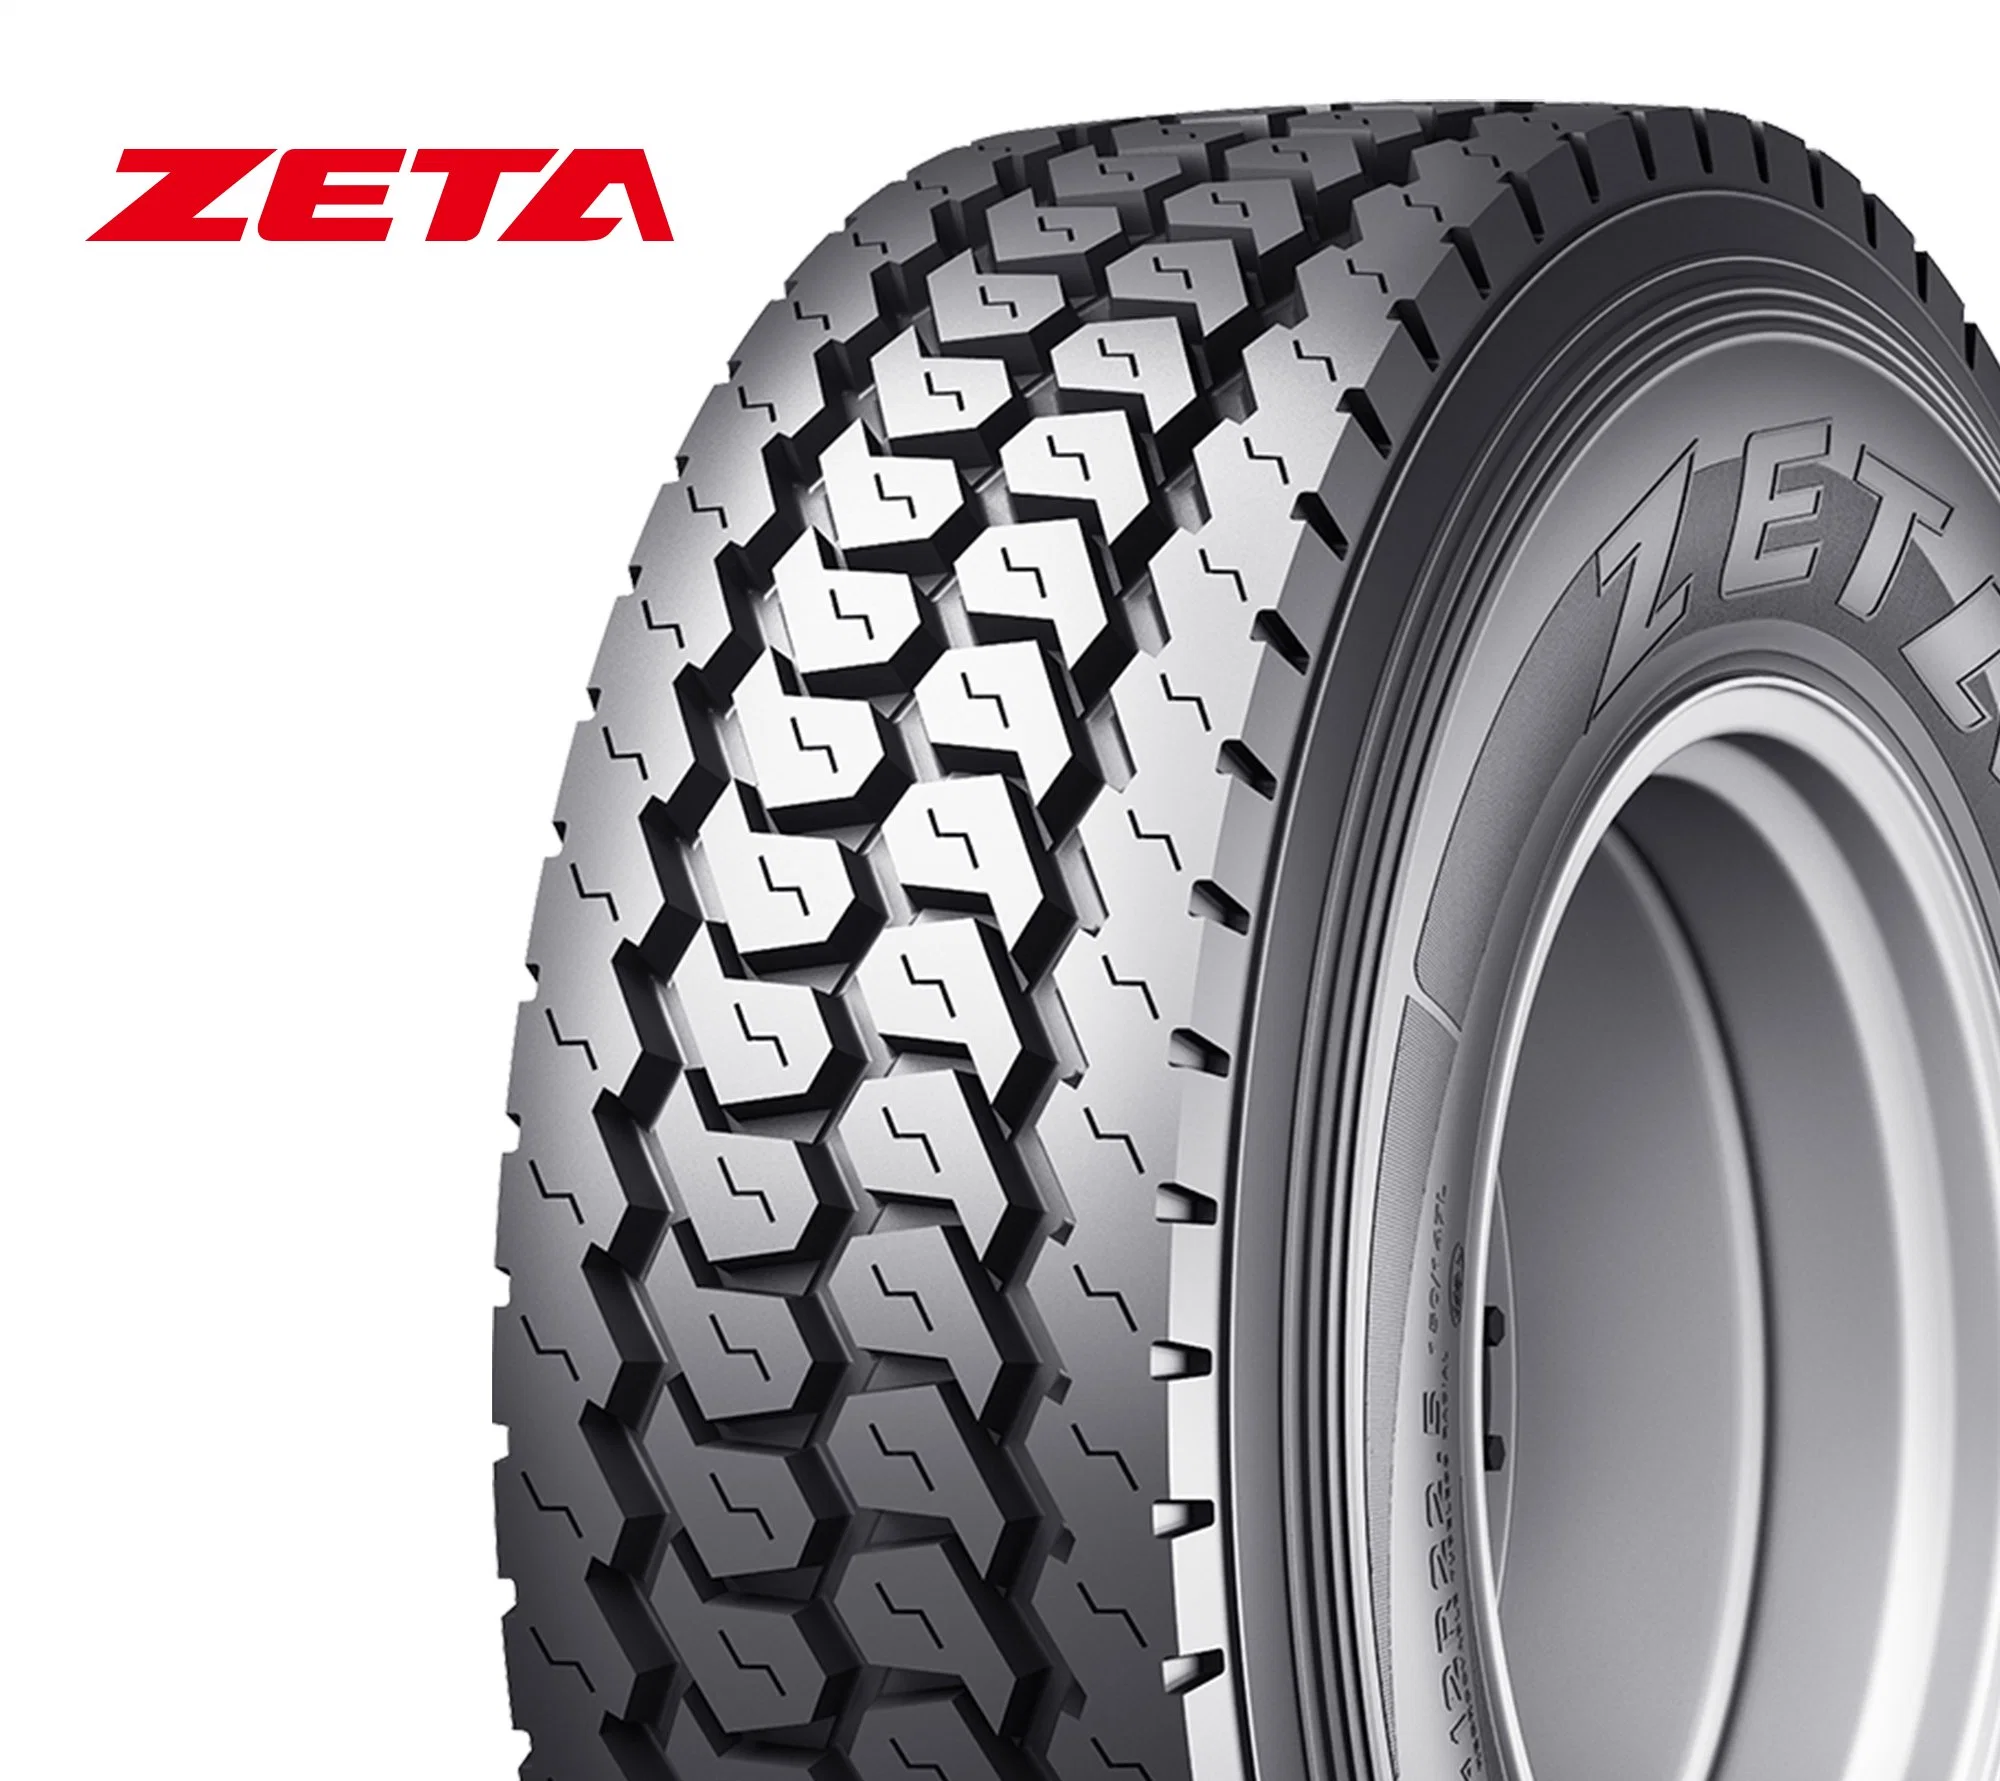 China TBR Tire Factory, Well Made Truck Tire, All Steel Radial Truck Tire, High Standard TBR Tires